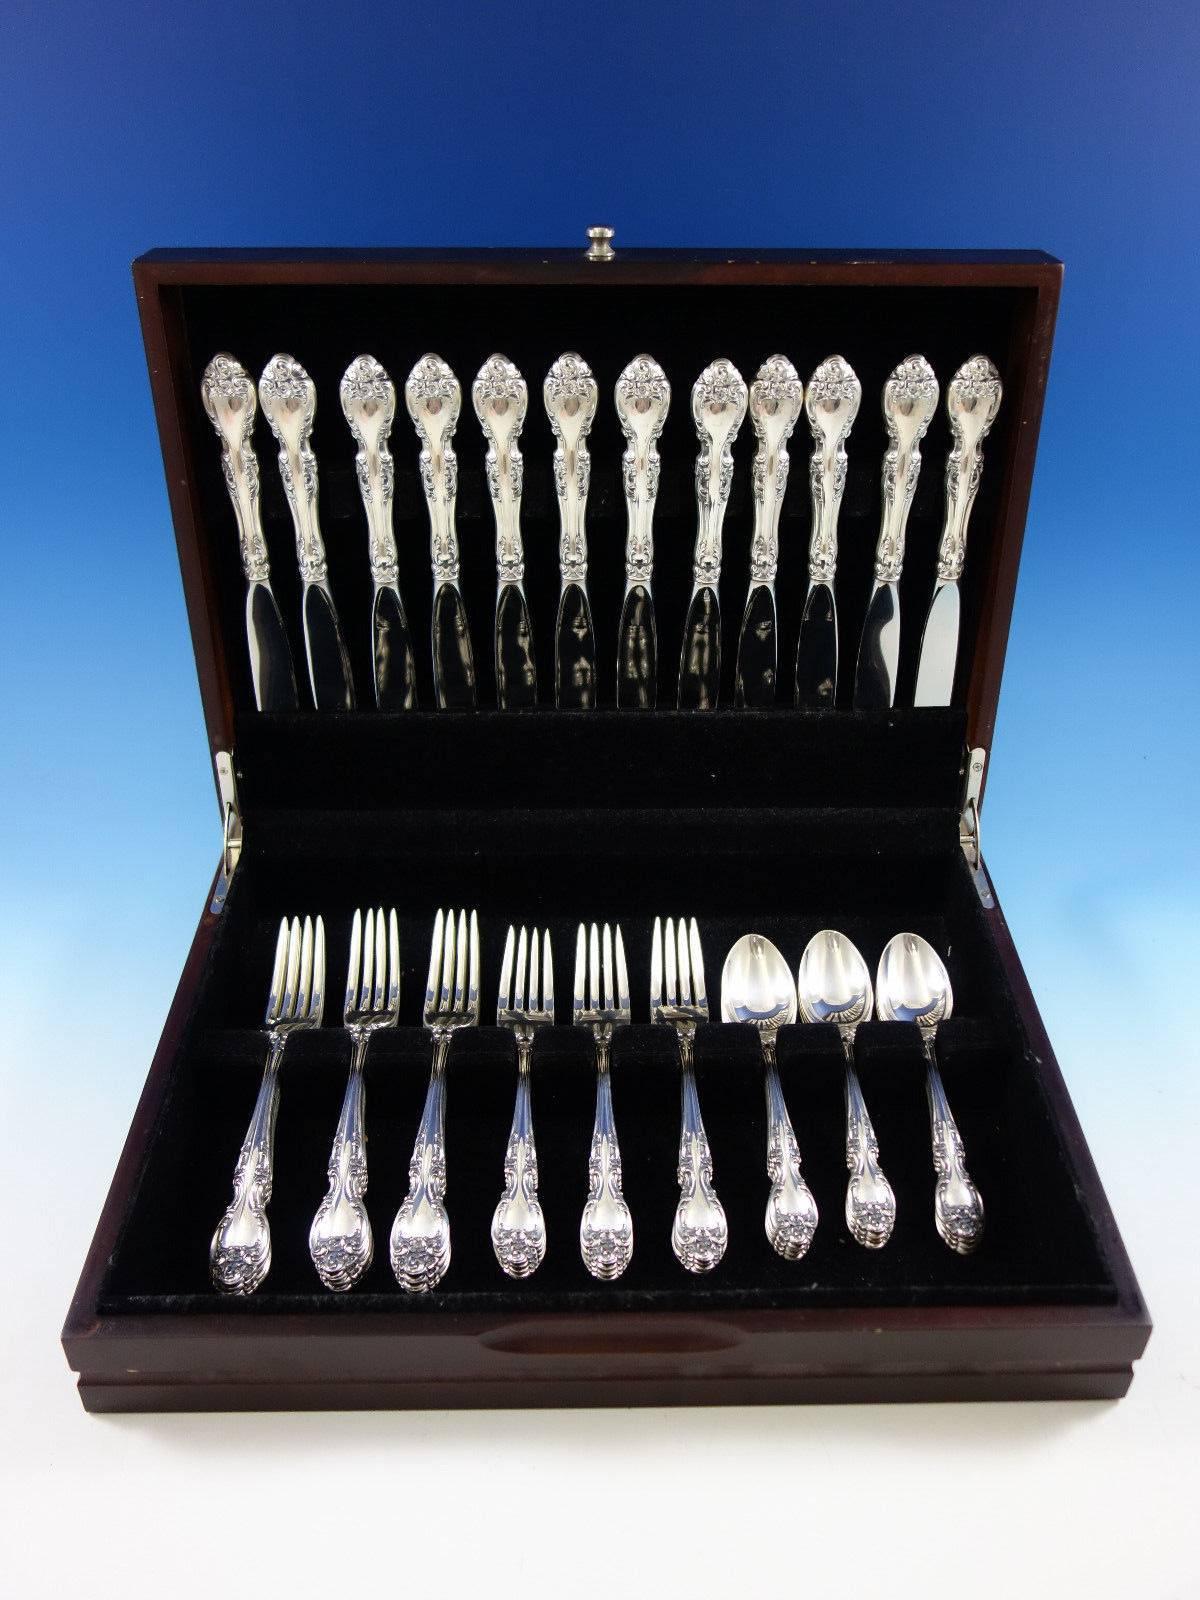 Gorgeous Melrose by Gorham sterling silver flatware set of 48 pieces. This set includes: 

12 knives, 8 7/8